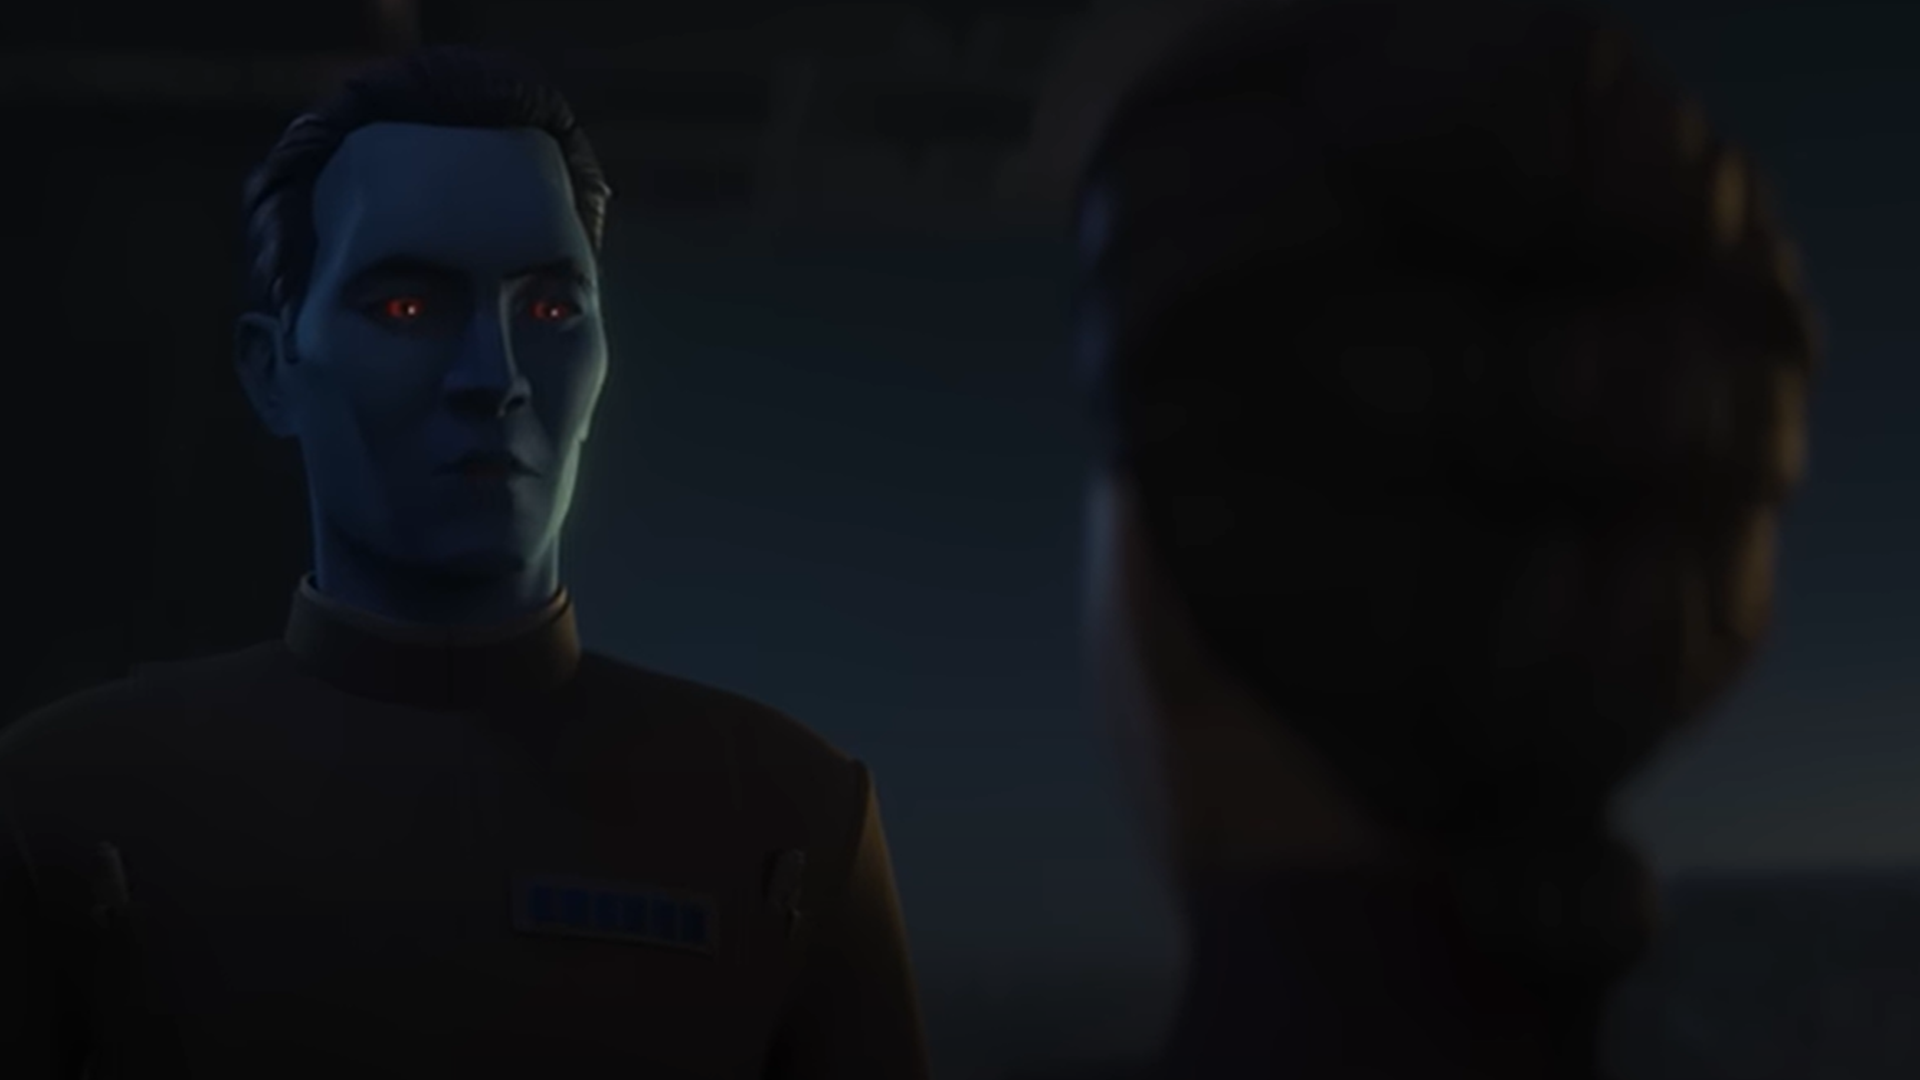 A military leader recruits a member for the cause in this image from Lucasfilm.